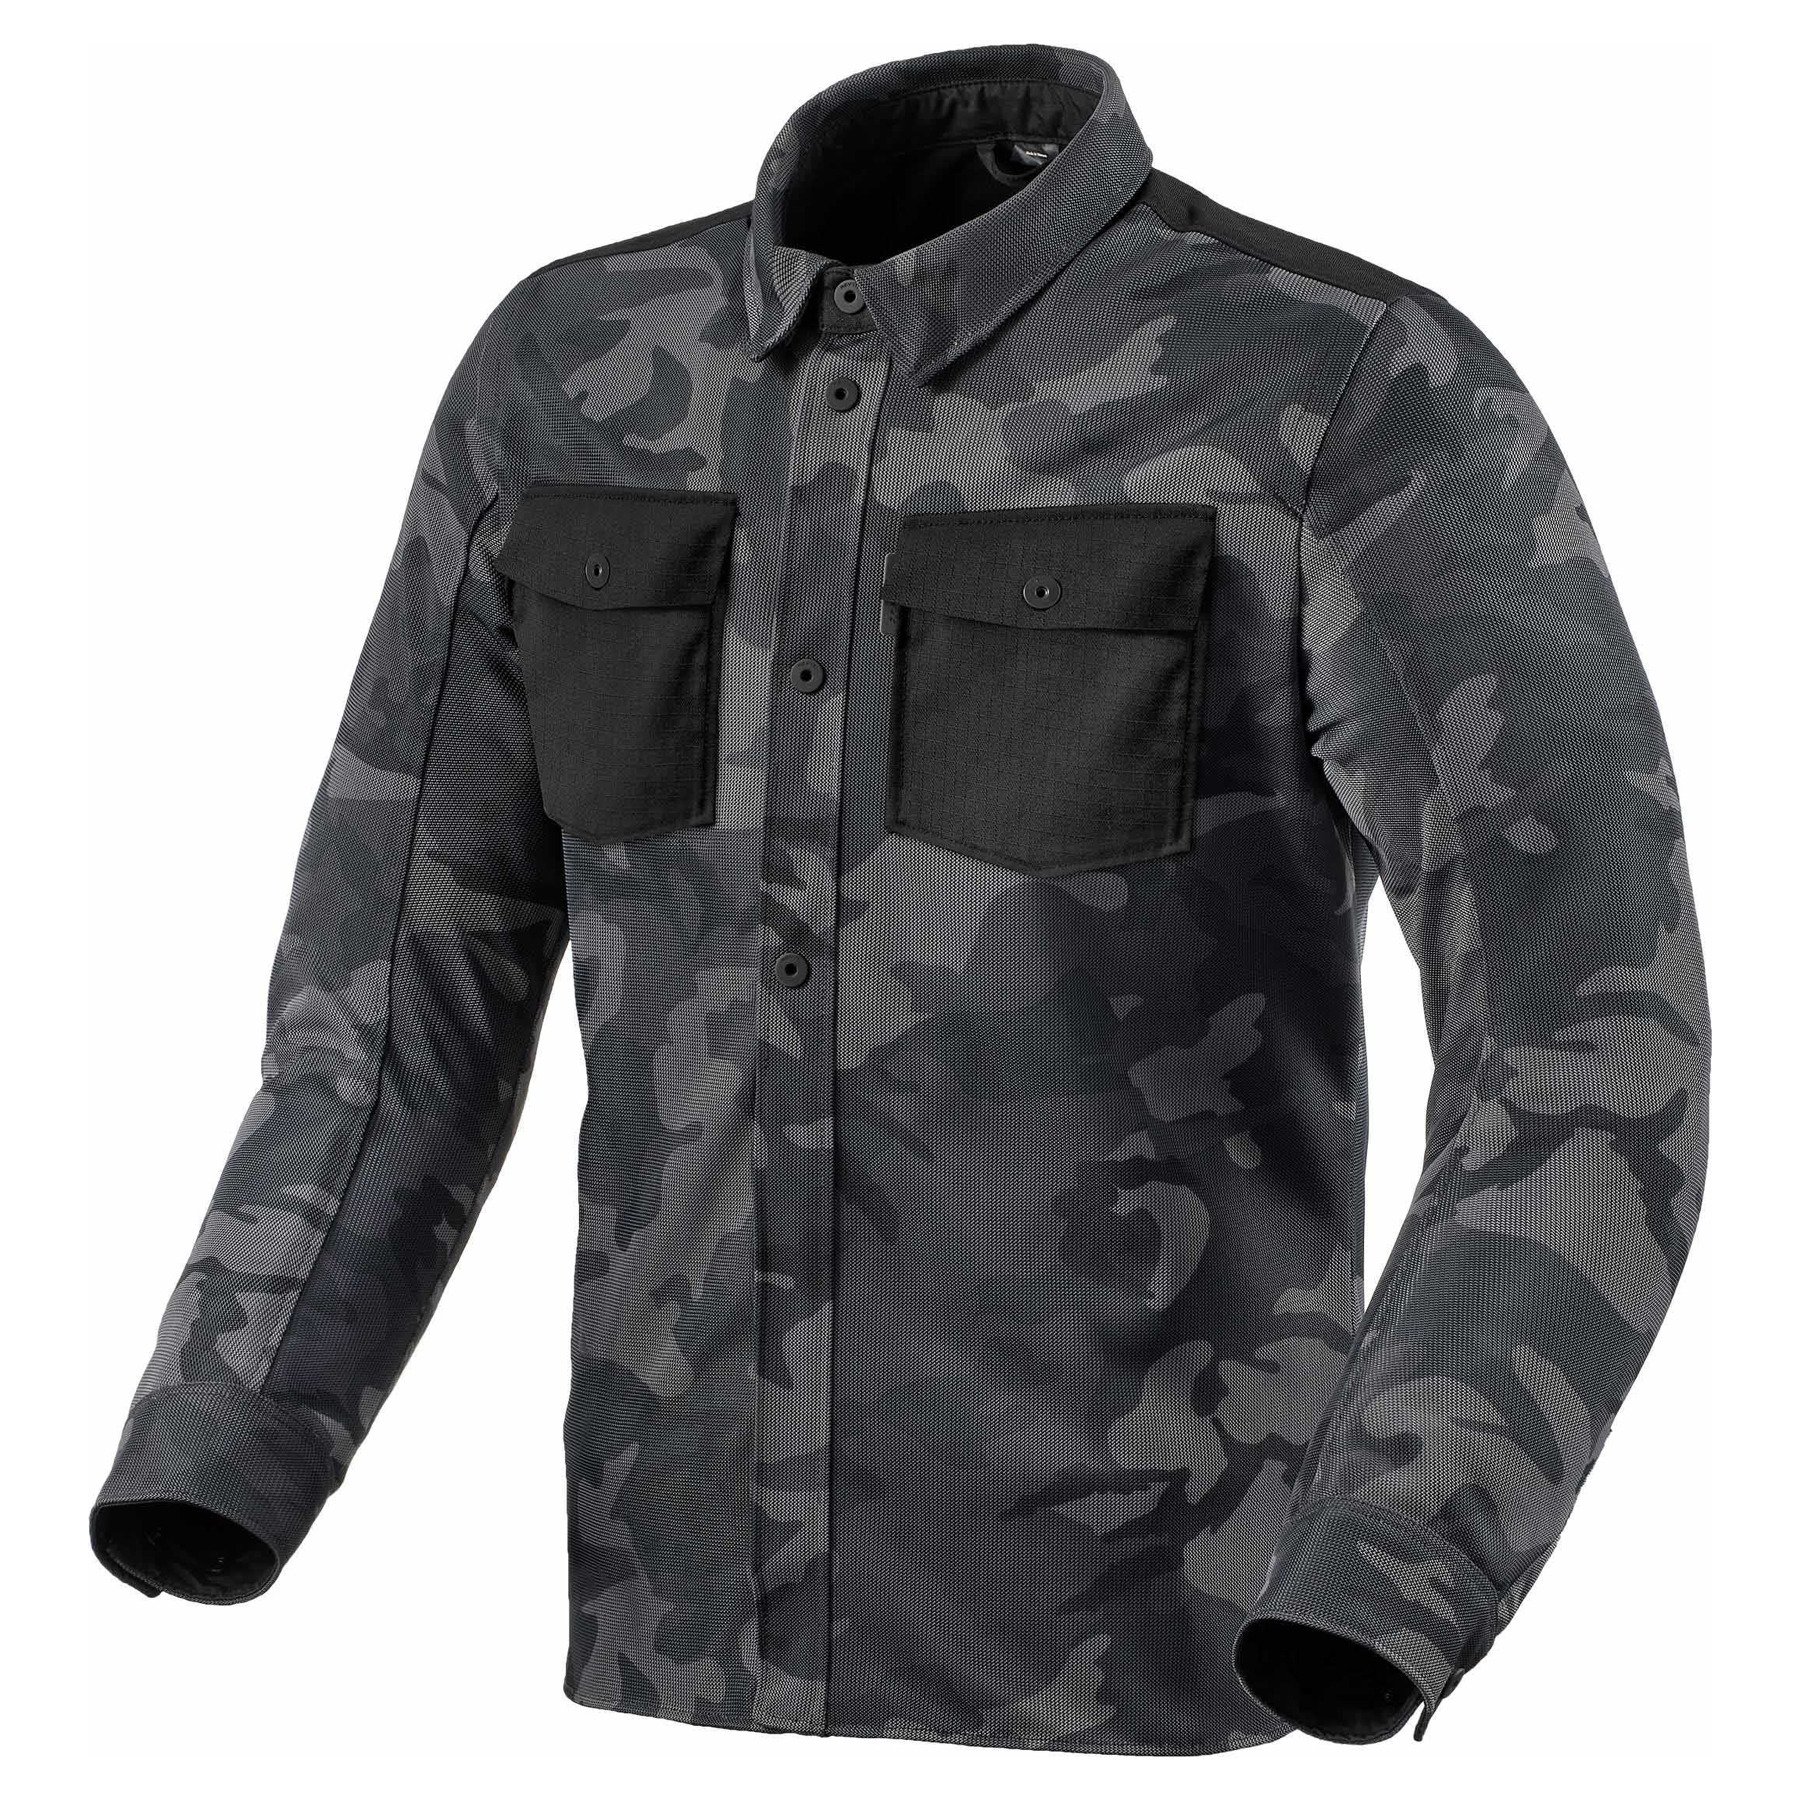 Image of REV'IT! Overshirt Tracer Air 2 Camo Dark Gris Blouson Taille L